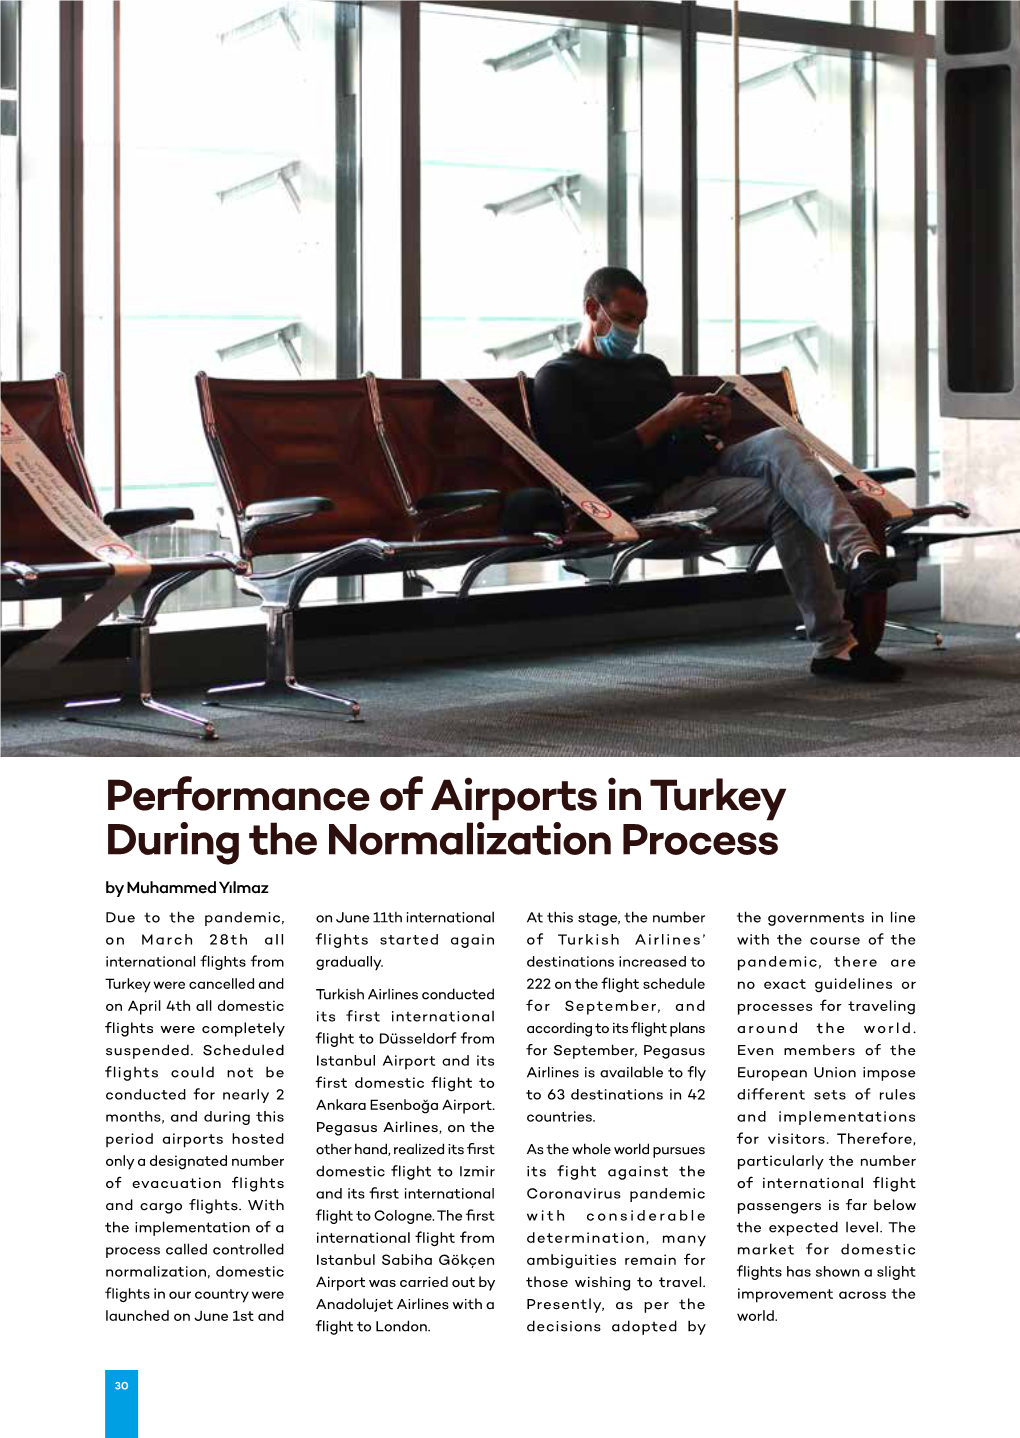 Performance of Airports in Turkey During the Normalization Process